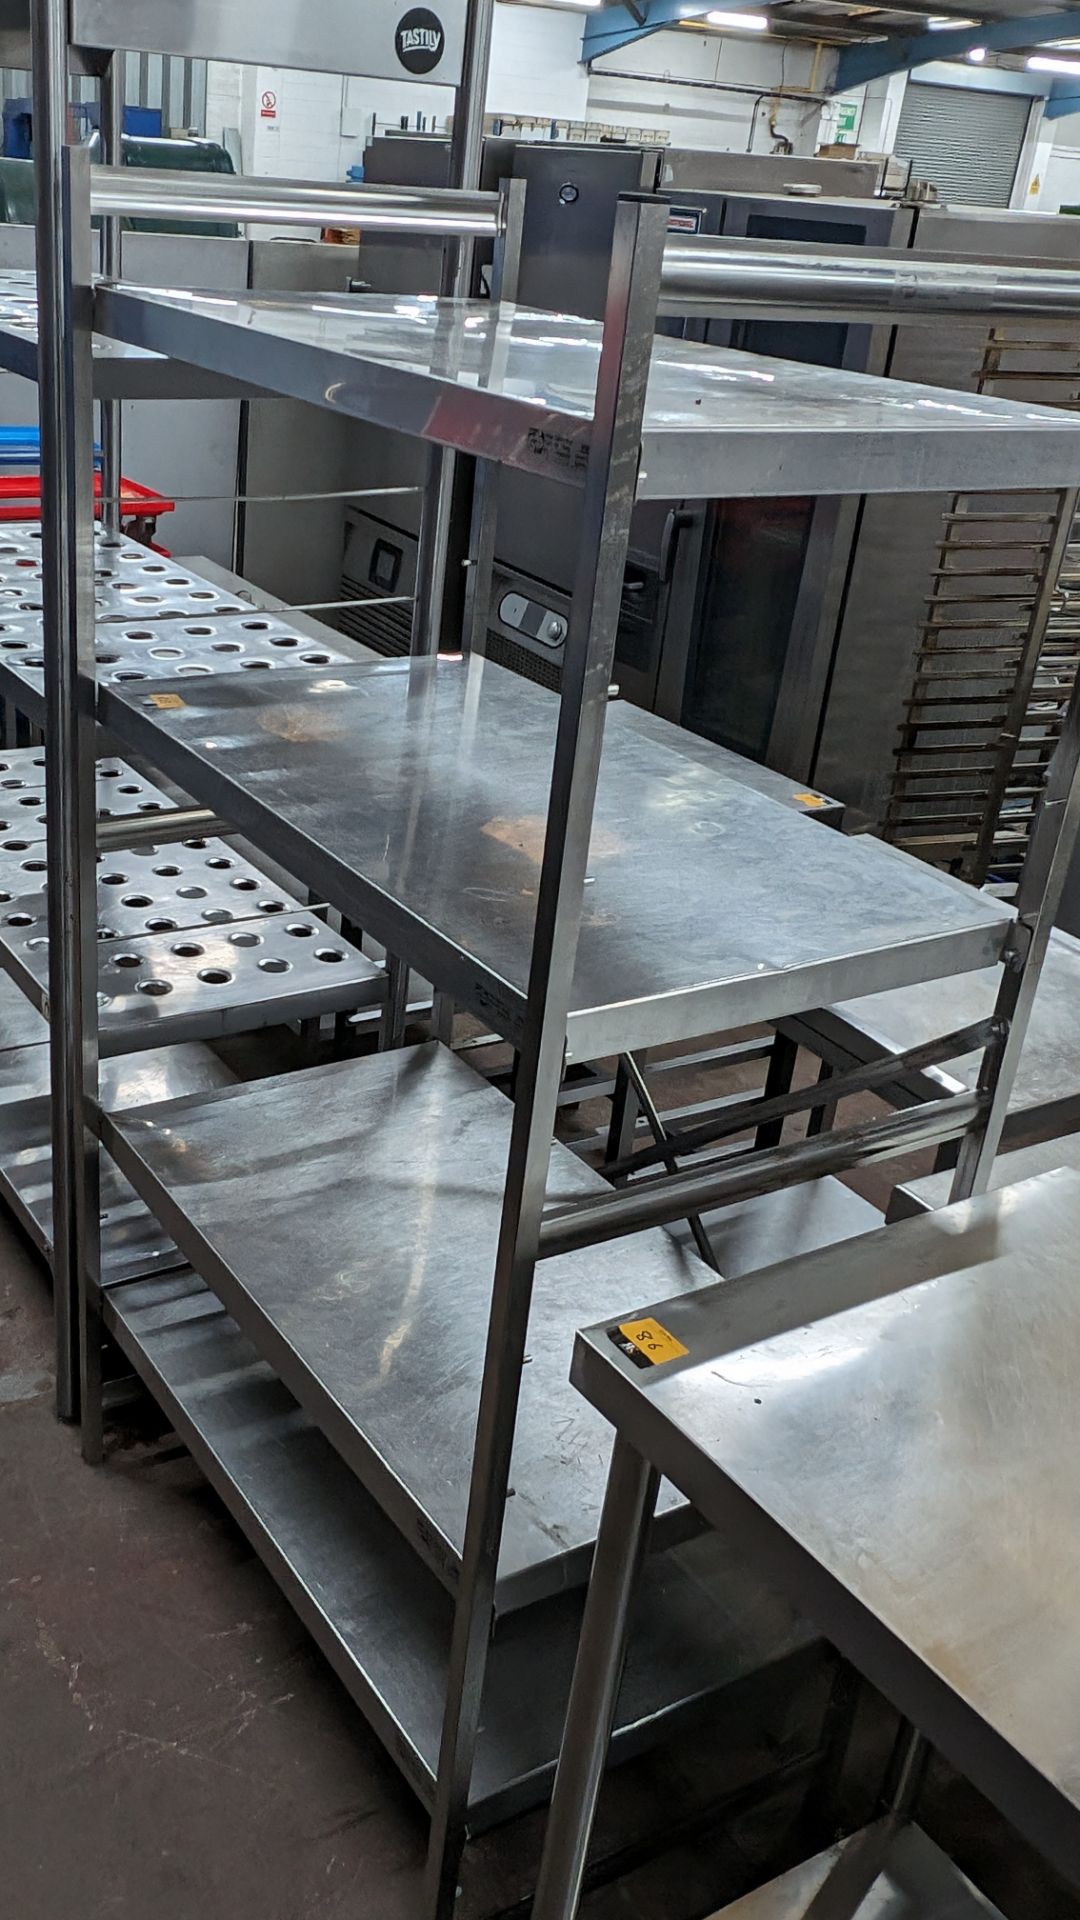 Viessmann stainless steel shelving unit with 4 shelves, max external dimensions 1000 x 1800 x 600mm